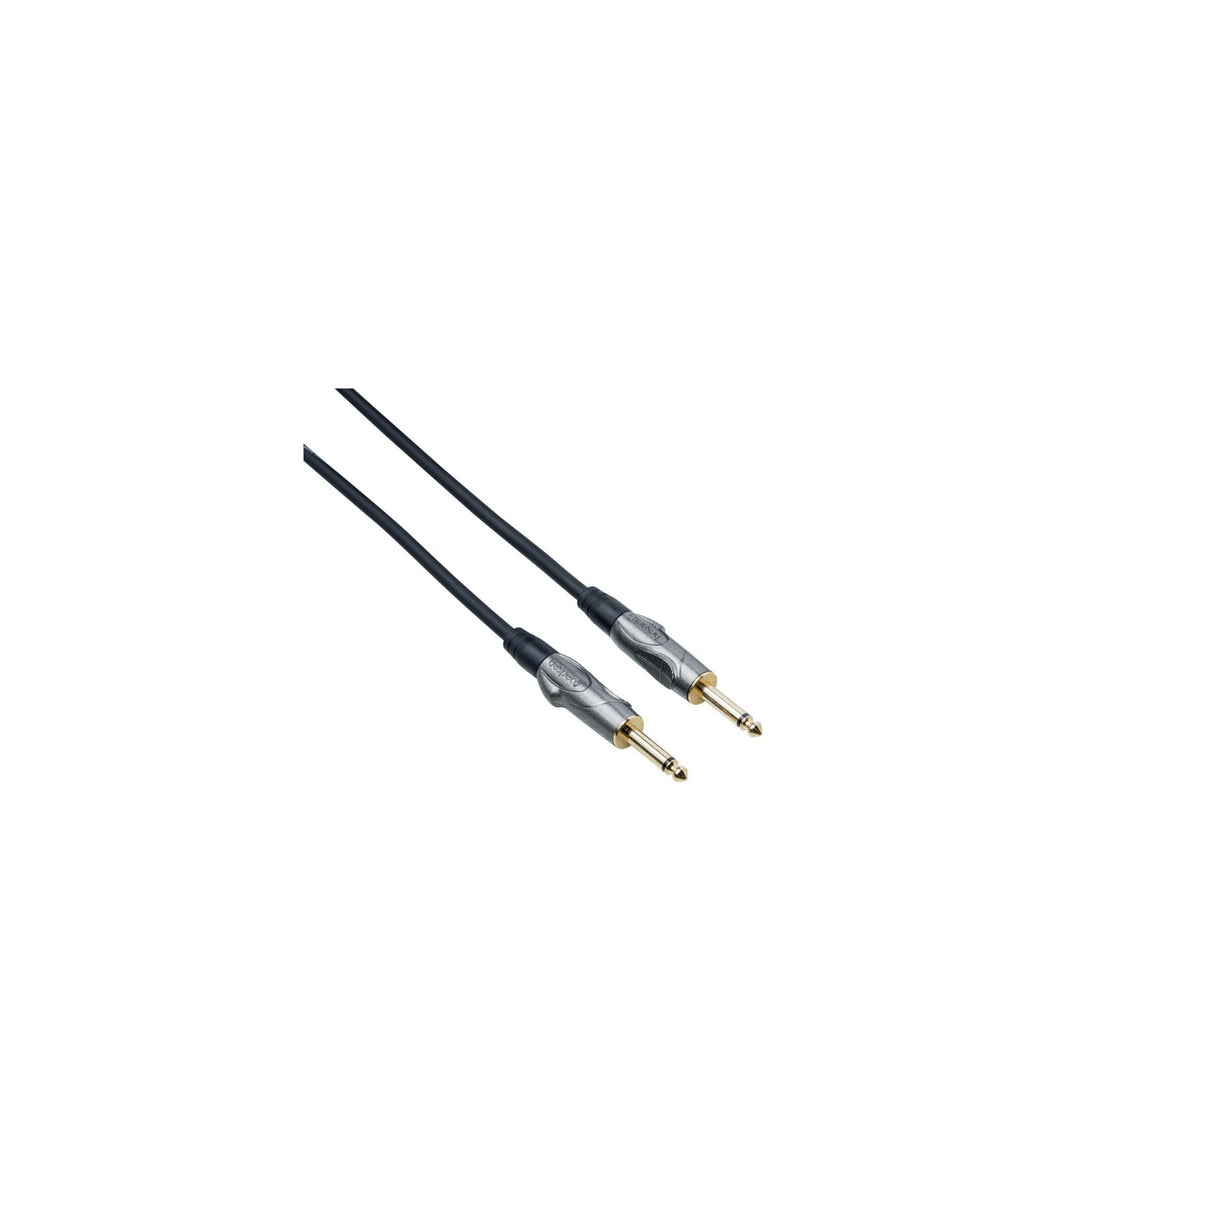 Bespeco TT300 Titanium Series Straight Angle 1/4 Inch to 1/4 Inch Guitar Cable, 9.8 Foot